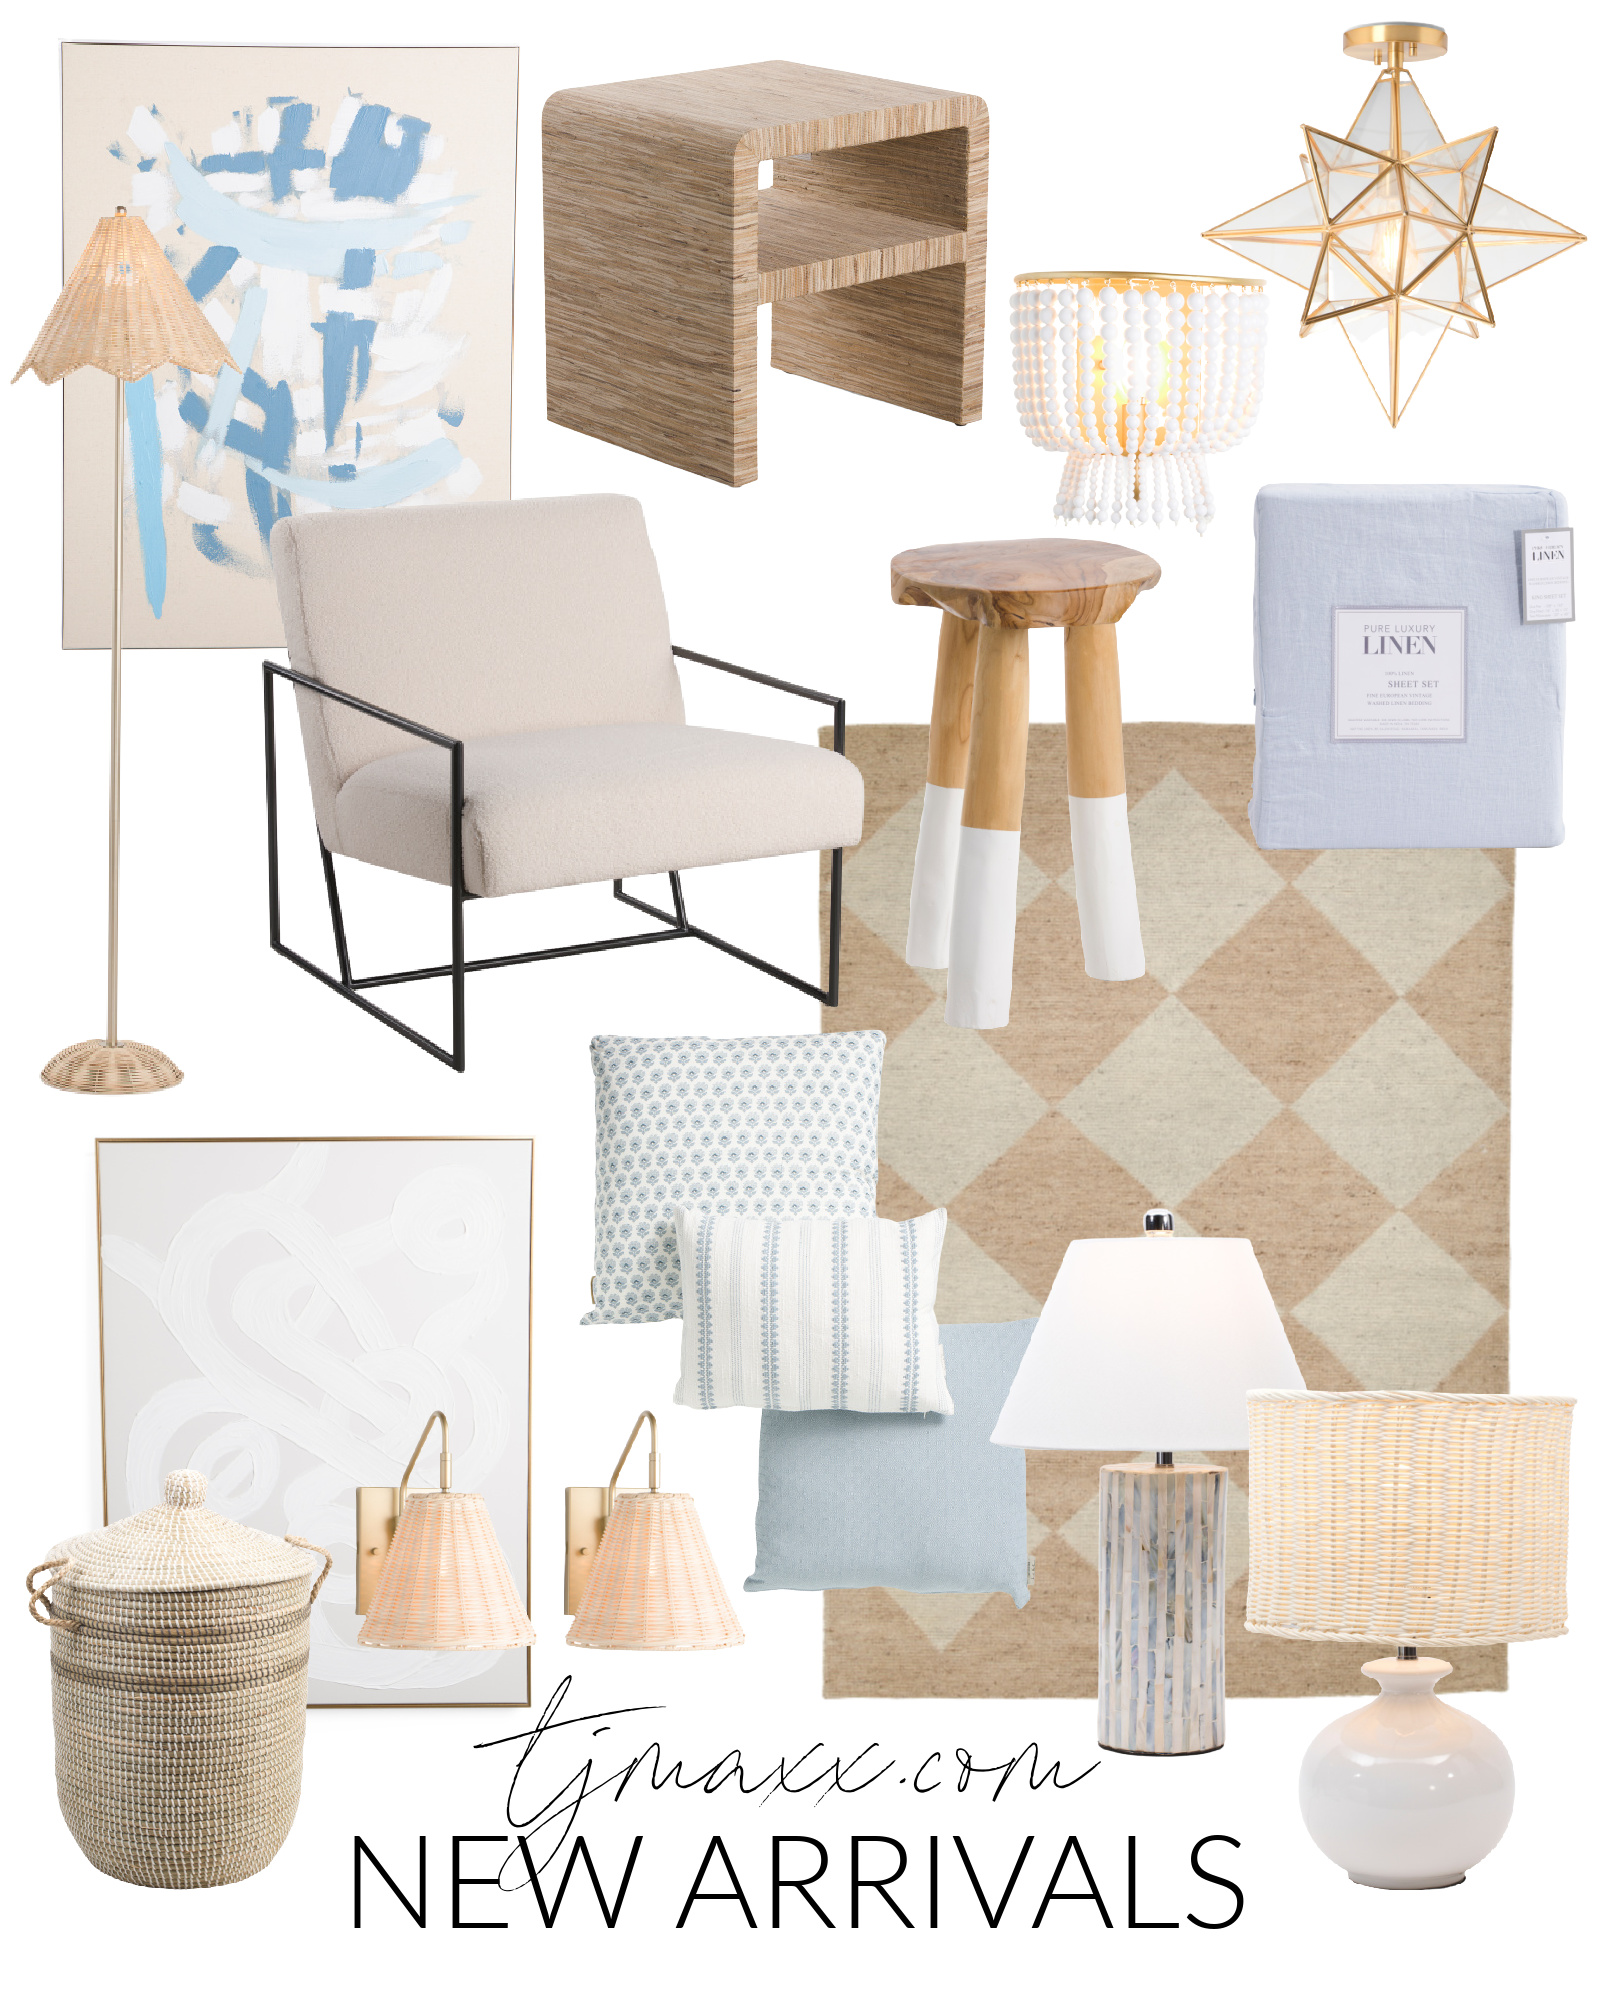 TJ Maxx Fall Home Decor: Top 30 Favorites - House of Navy